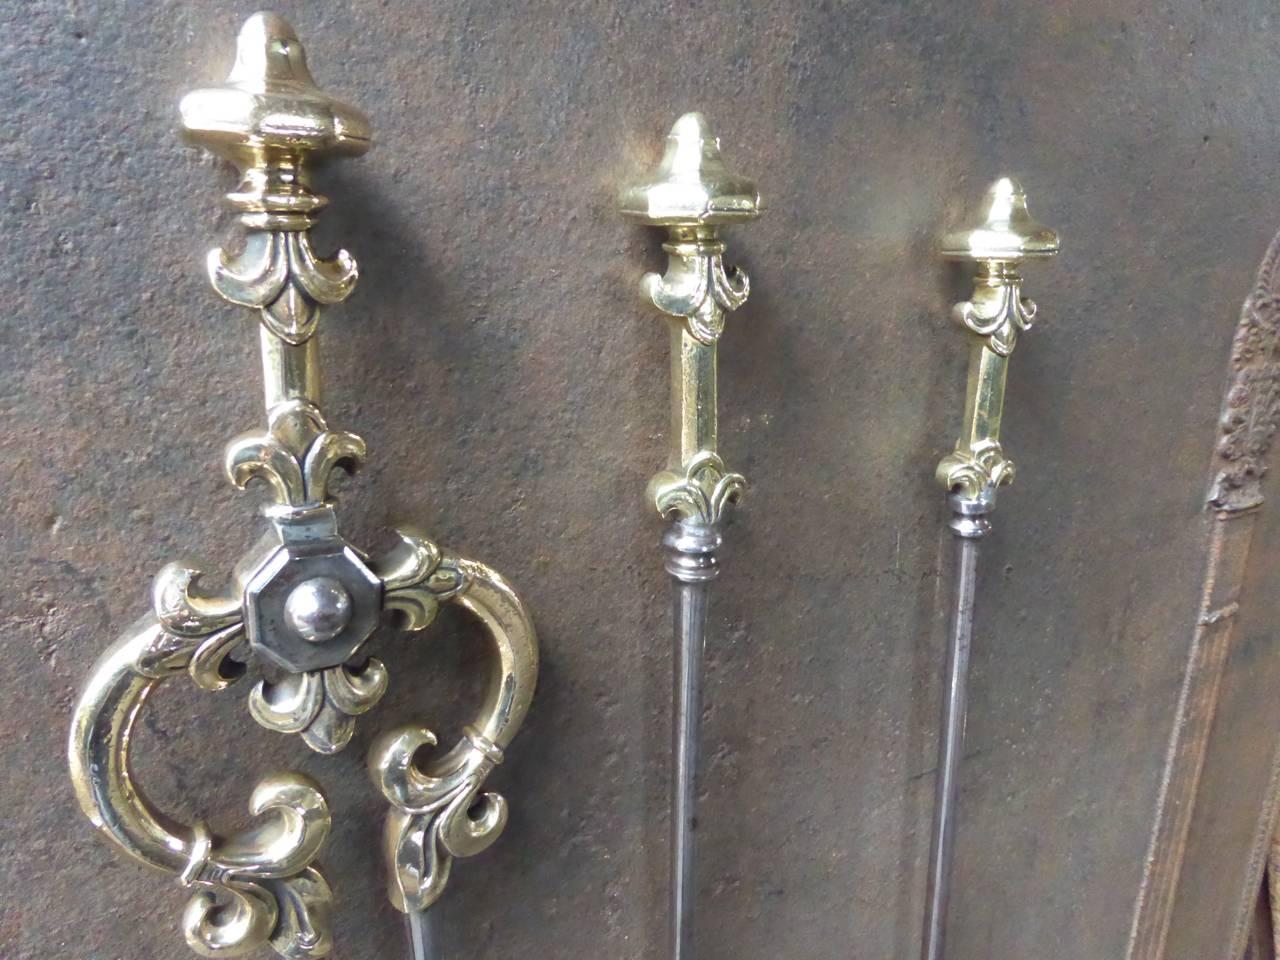 Polished 19th Century English Fireplace Tools or Fire Tool Set